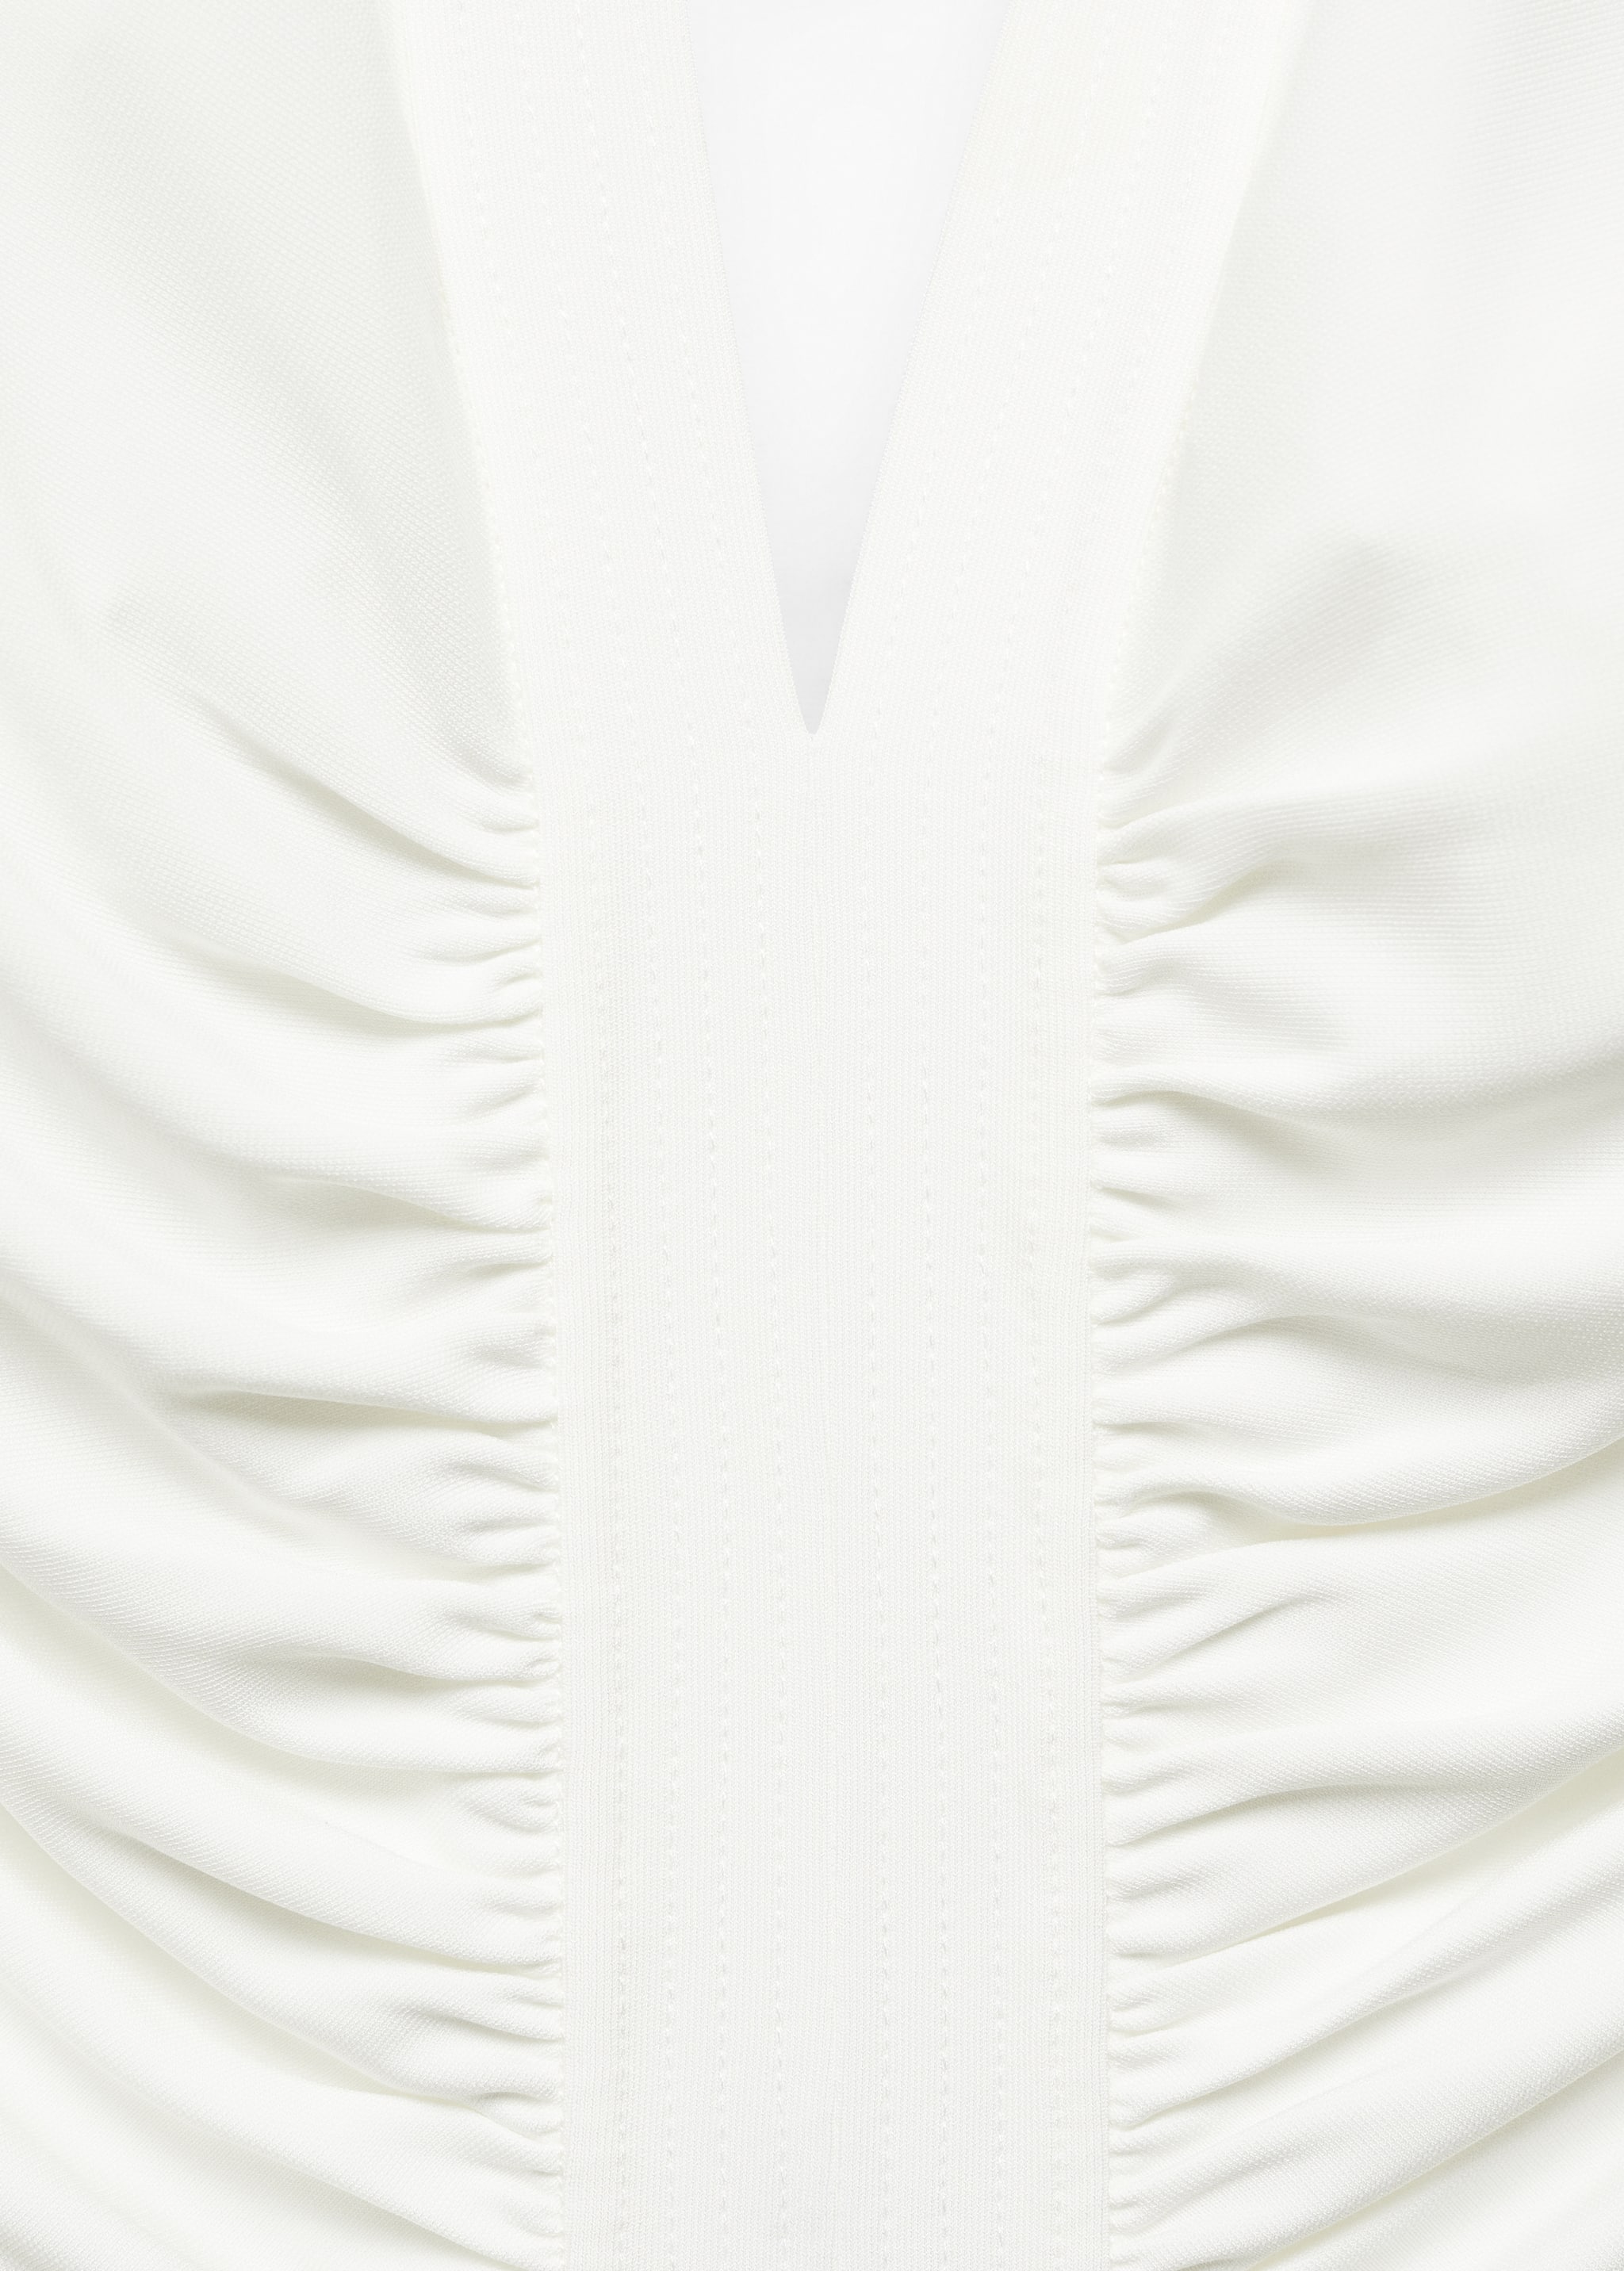 Draped halter dress with opening - Details of the article 8